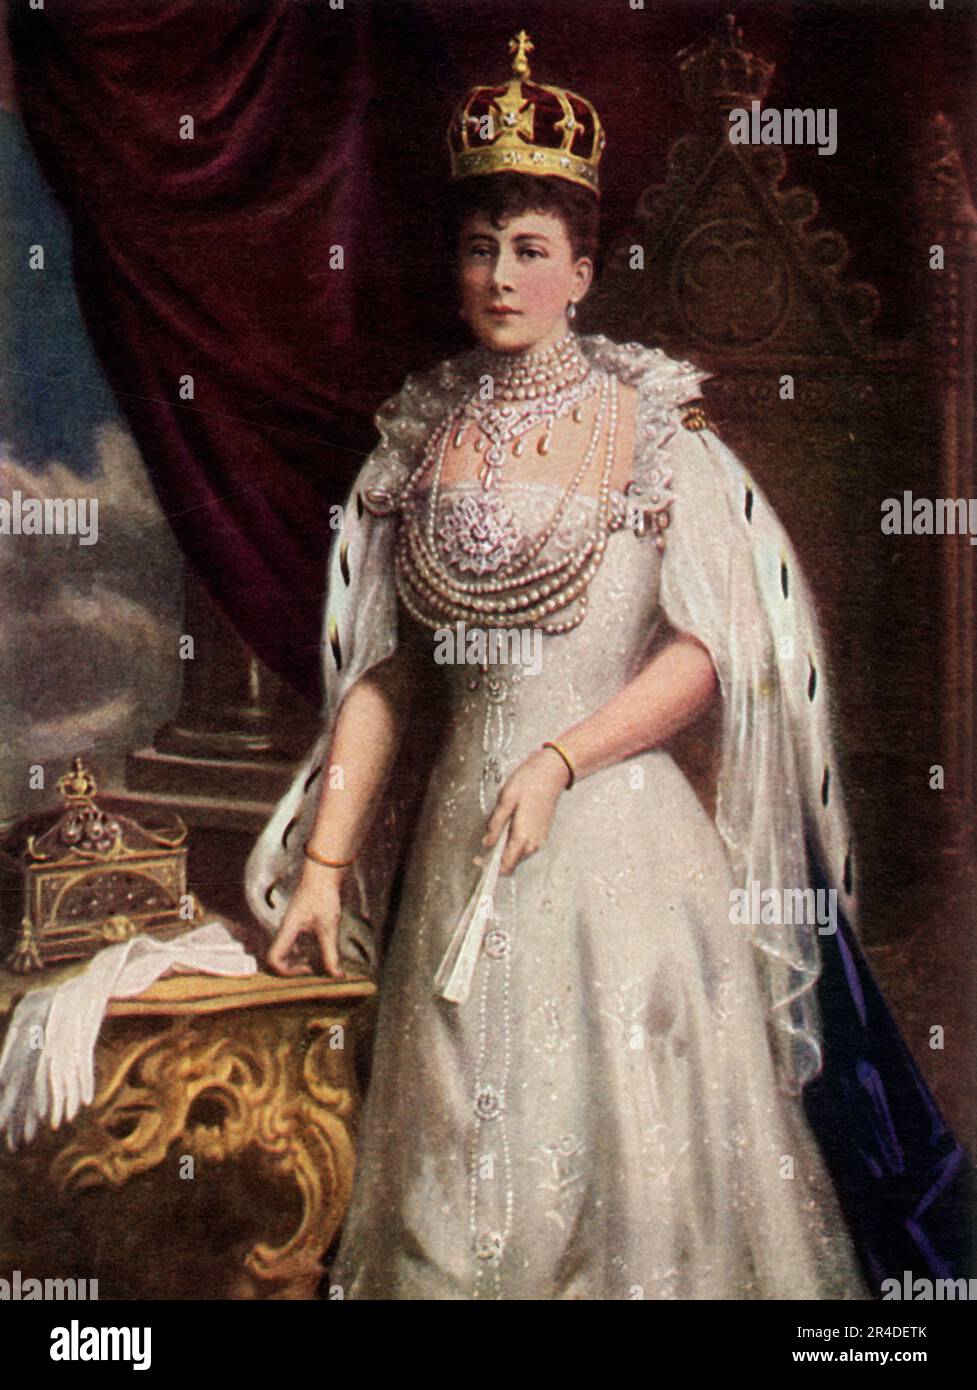 'H.M. Queen Mary', c1911. Mary of Teck, Queen of the United Kingdom and the British Dominions, and Empress of India. 'From a photograph by Messrs. Lafayette'. Published in &quot;The Portrait Book of Our Kings and Queens 1066-1911&quot;, edited by T. Leman Hare. [T. C. &amp; E. C. Jack, London &amp; Edinburgh] Stock Photo